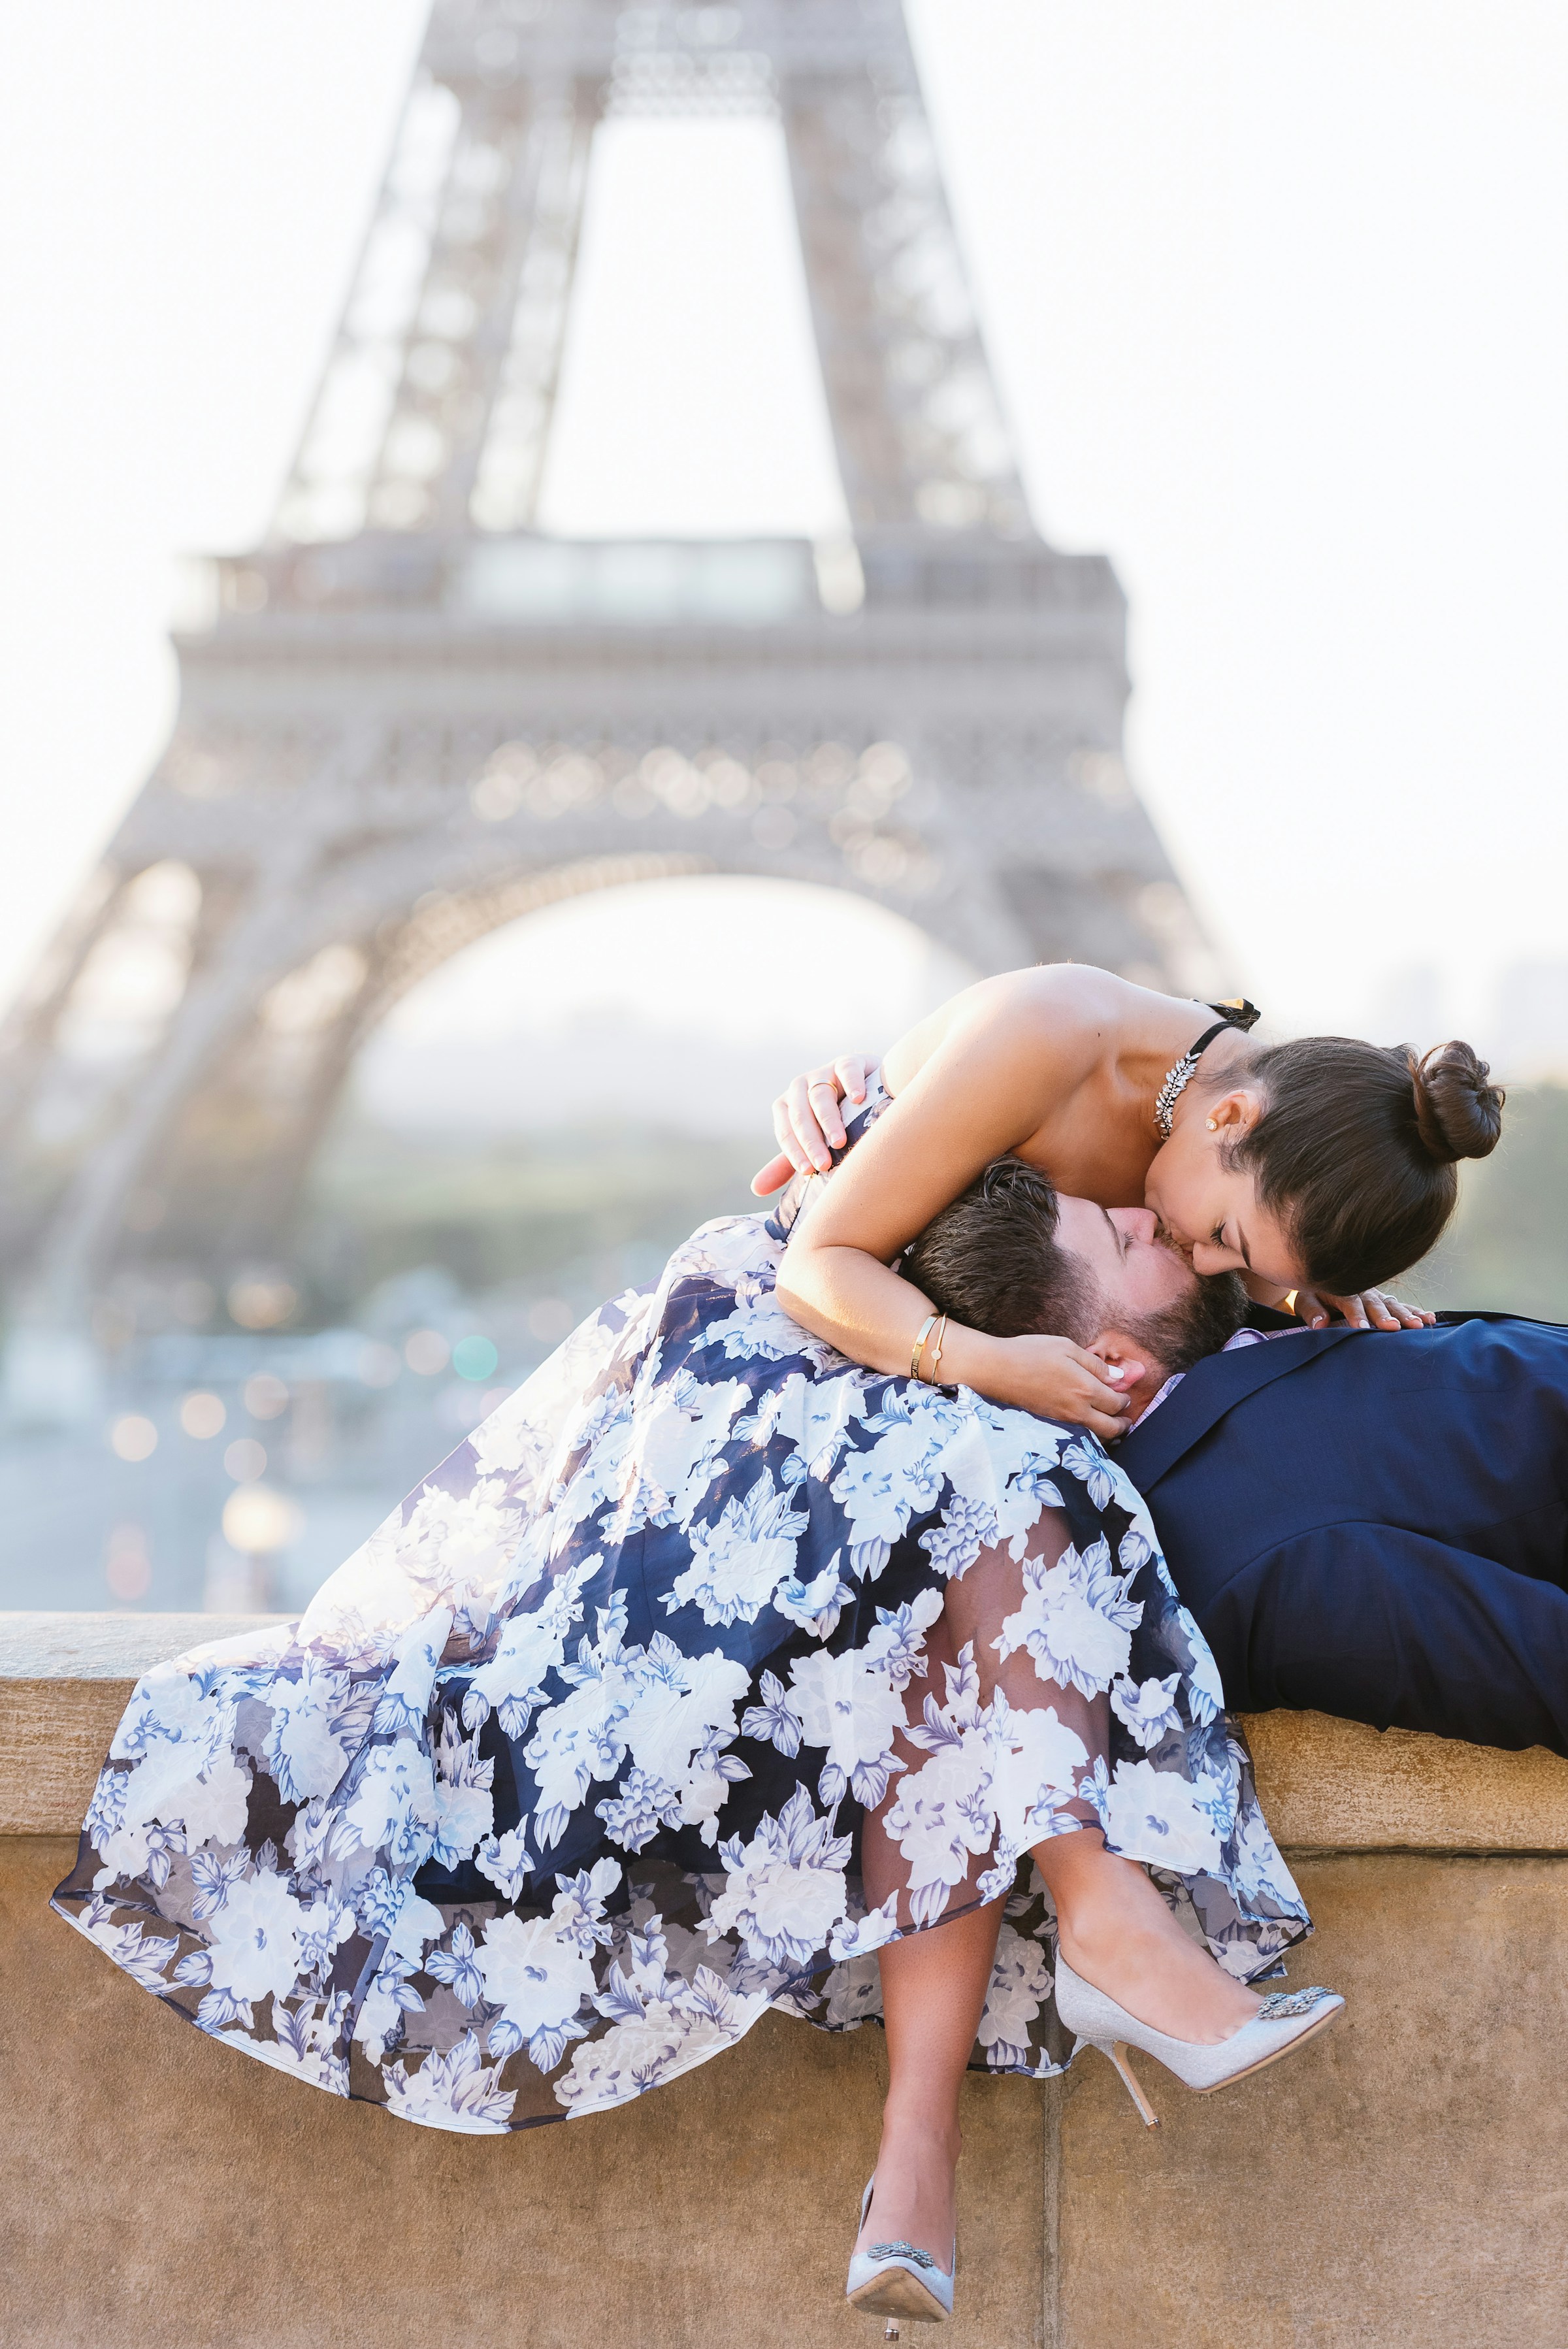 A couple kissing on a ledge in front of the Eiffel Tower in Paris | Source: Unsplash